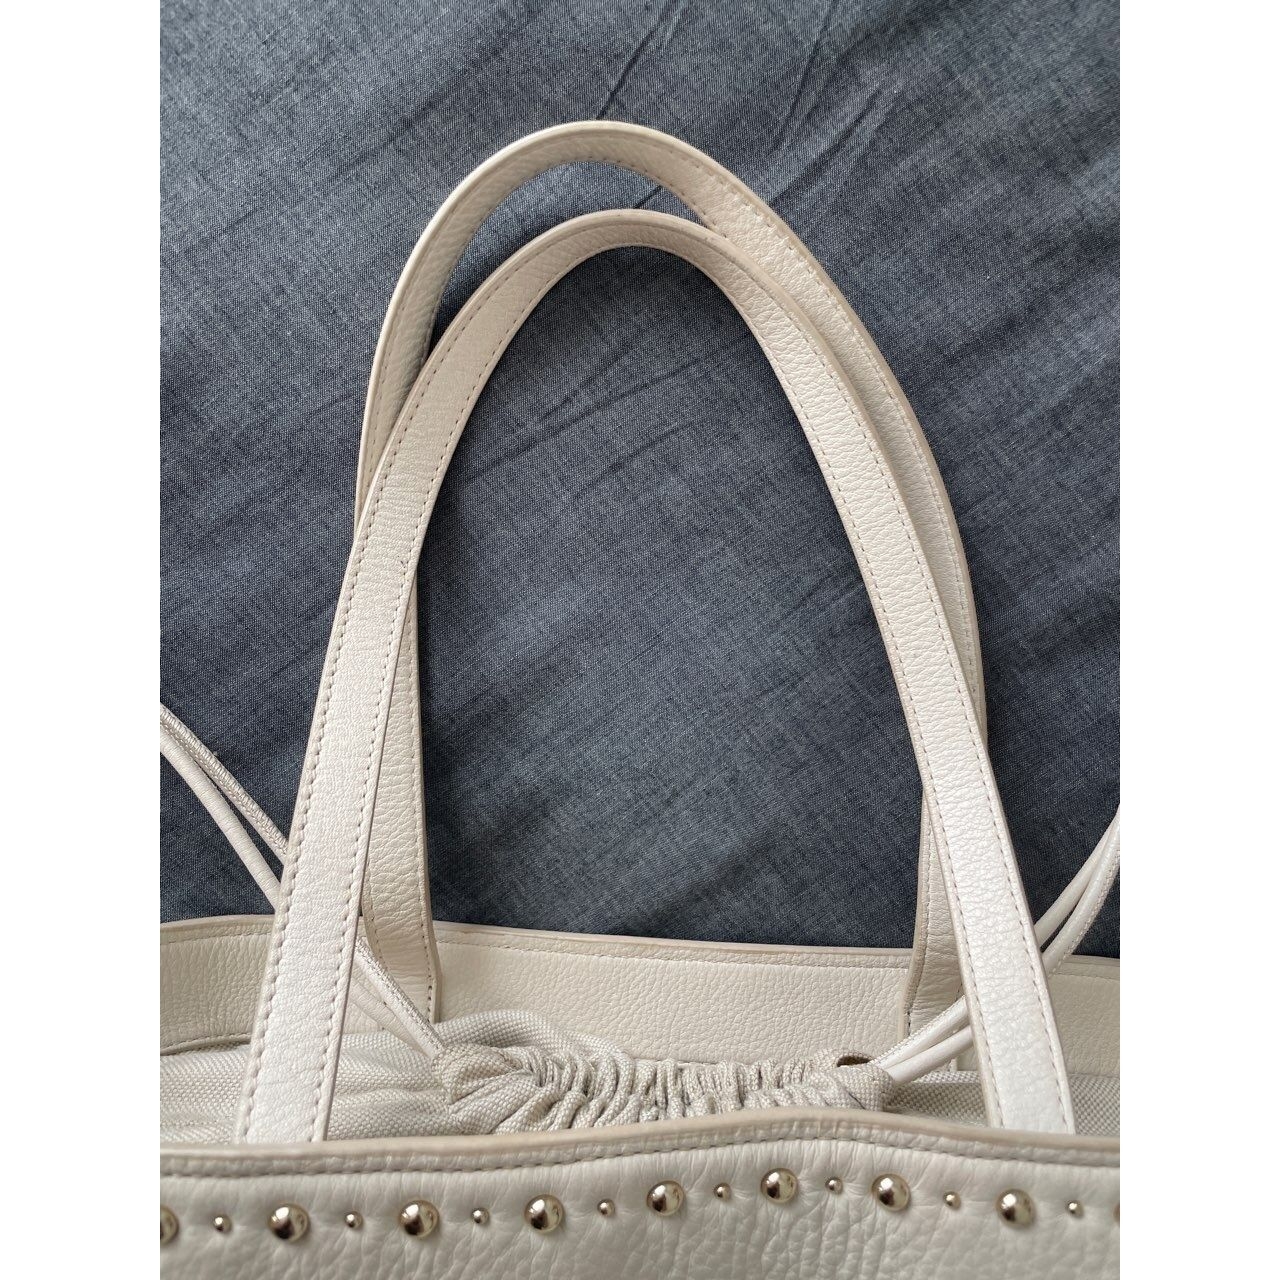 Kate Spade Hayes Street Studded Hattie Off White Tote Bag